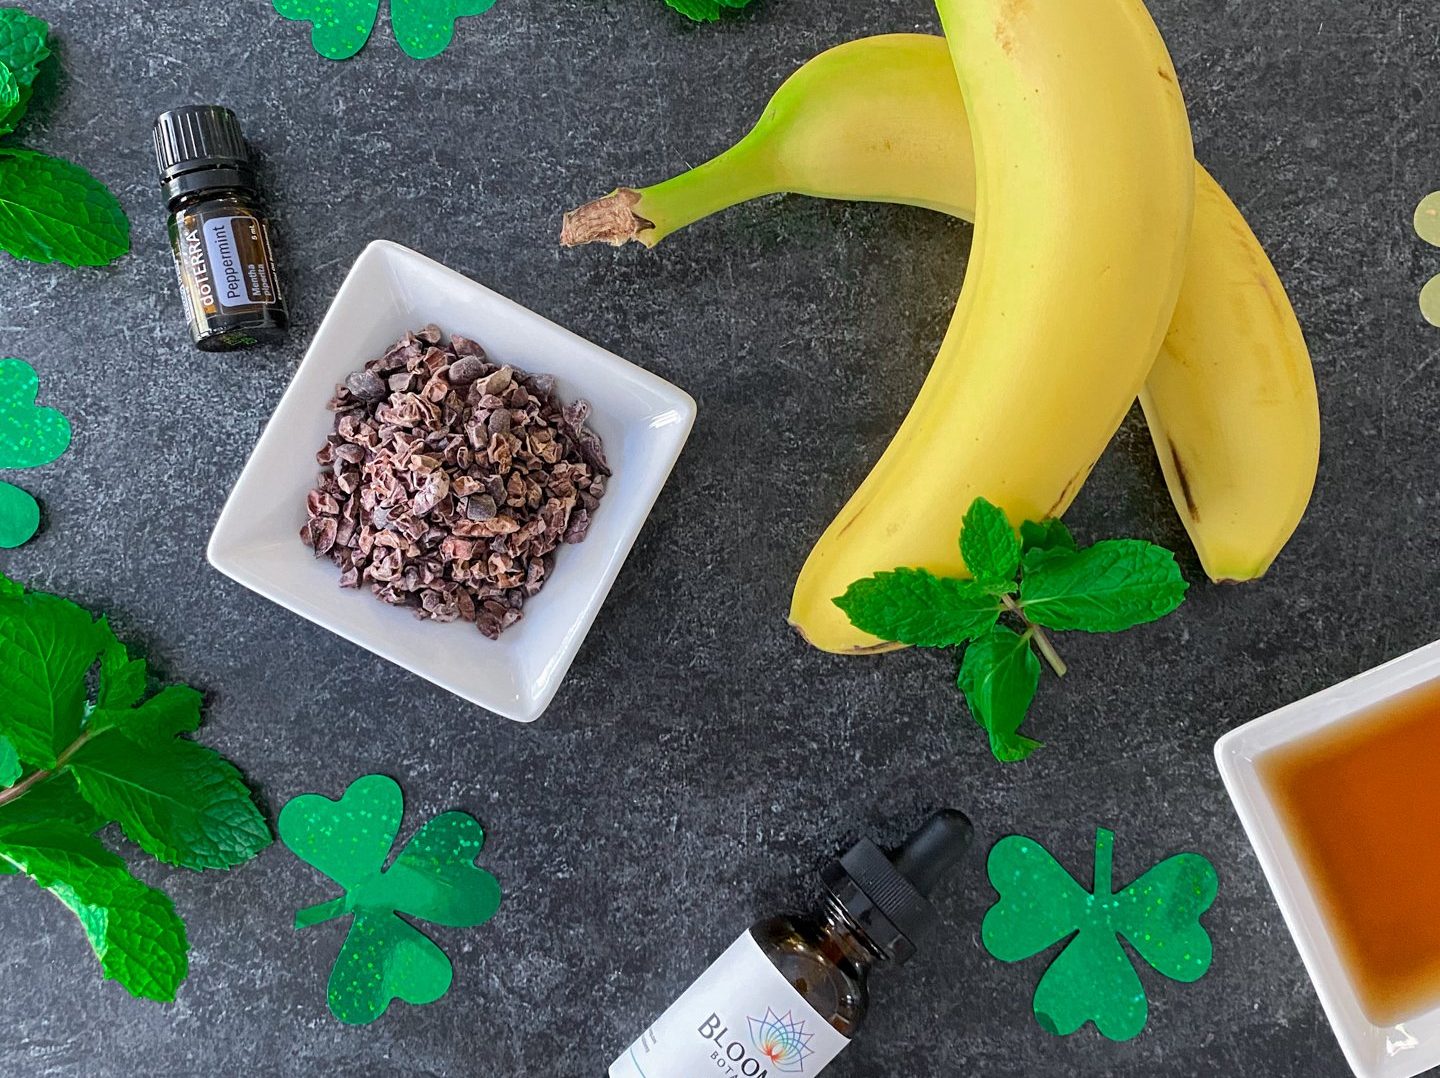 7 ingredients for CBD shamrock shake recipe including banana, cacao nibs, peppermint extract, CBD, maple